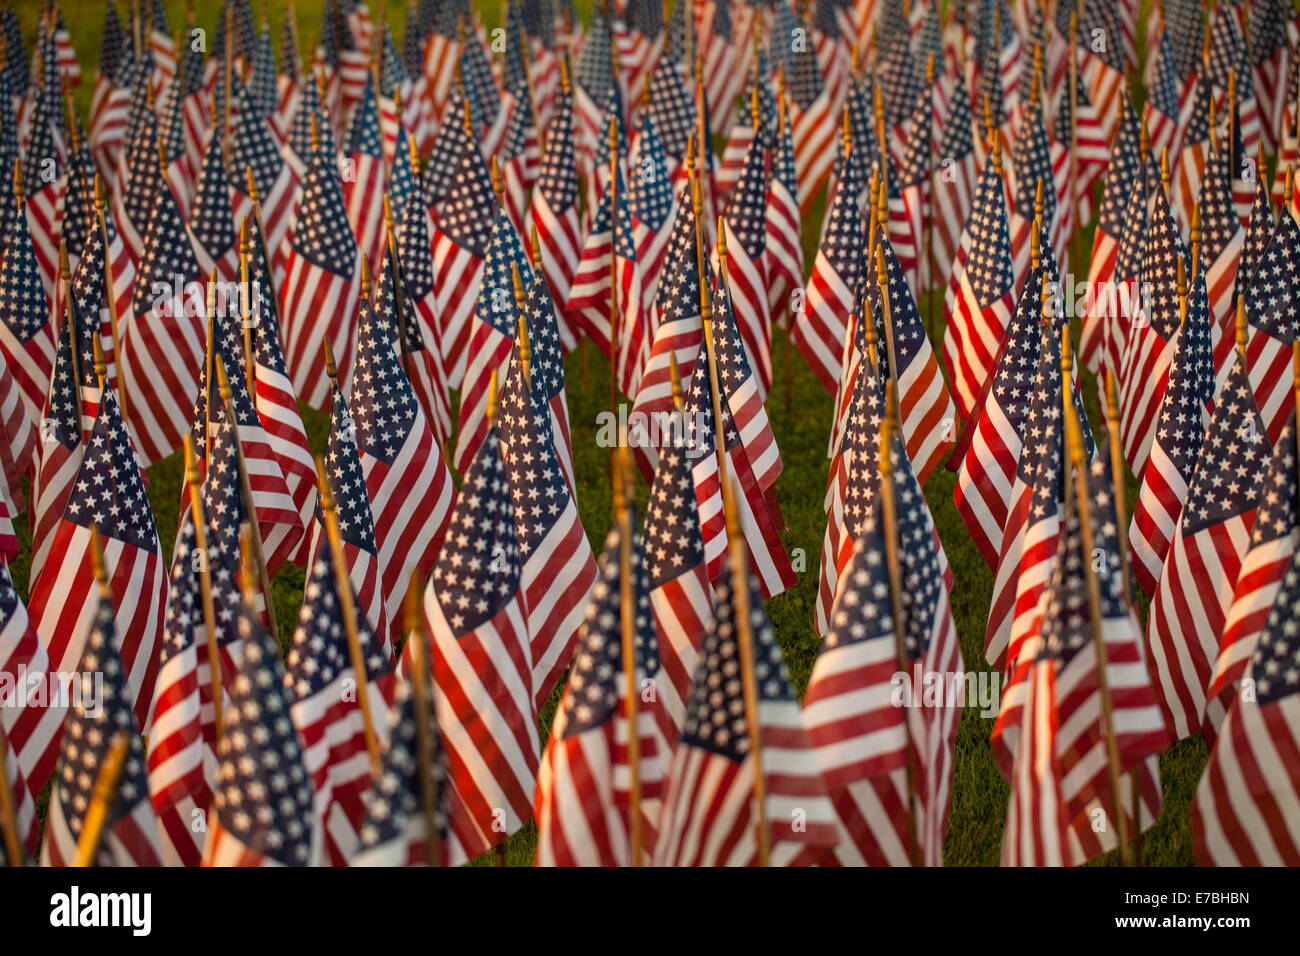 A US flag display in a cemetery in Strasburg, PA Stock Photo